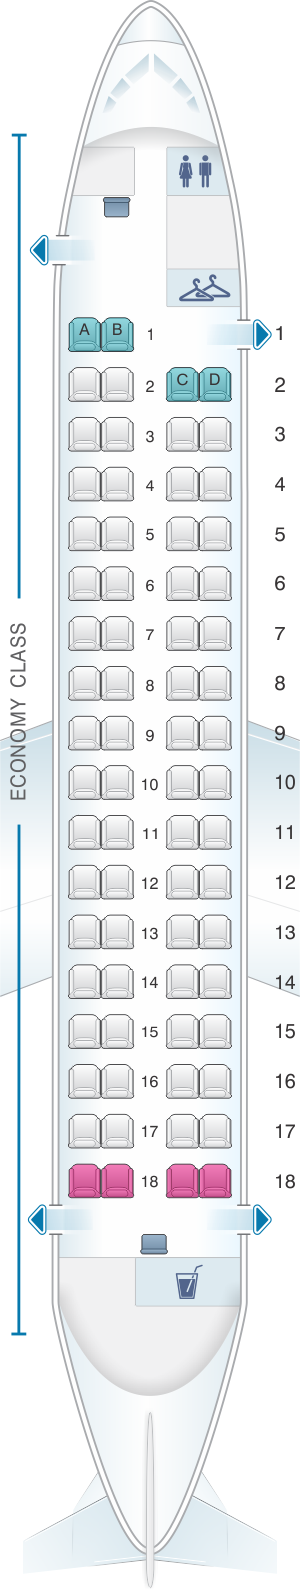 Seat map for Porter Airlines Bombardier Q400